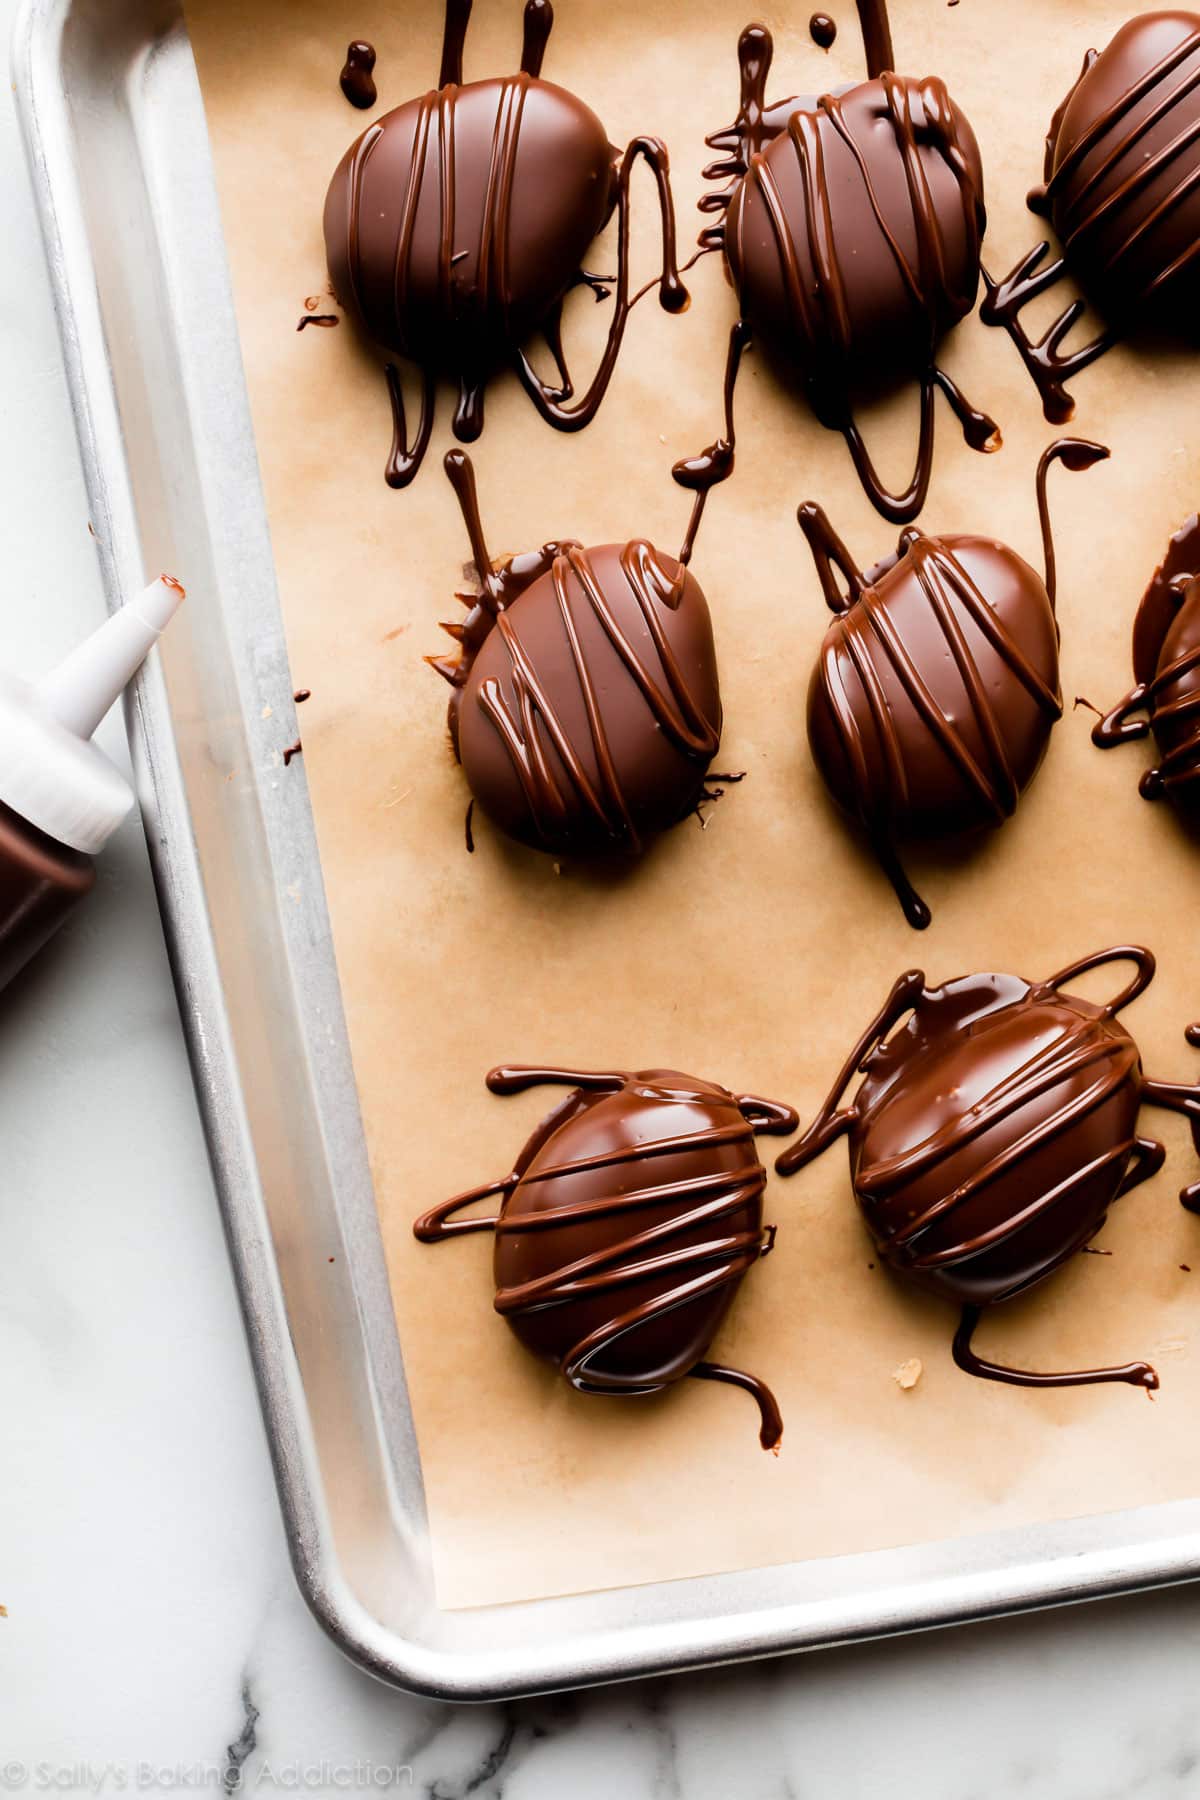 chocolate coated egg-shaped candies with chocolate drizzle on top